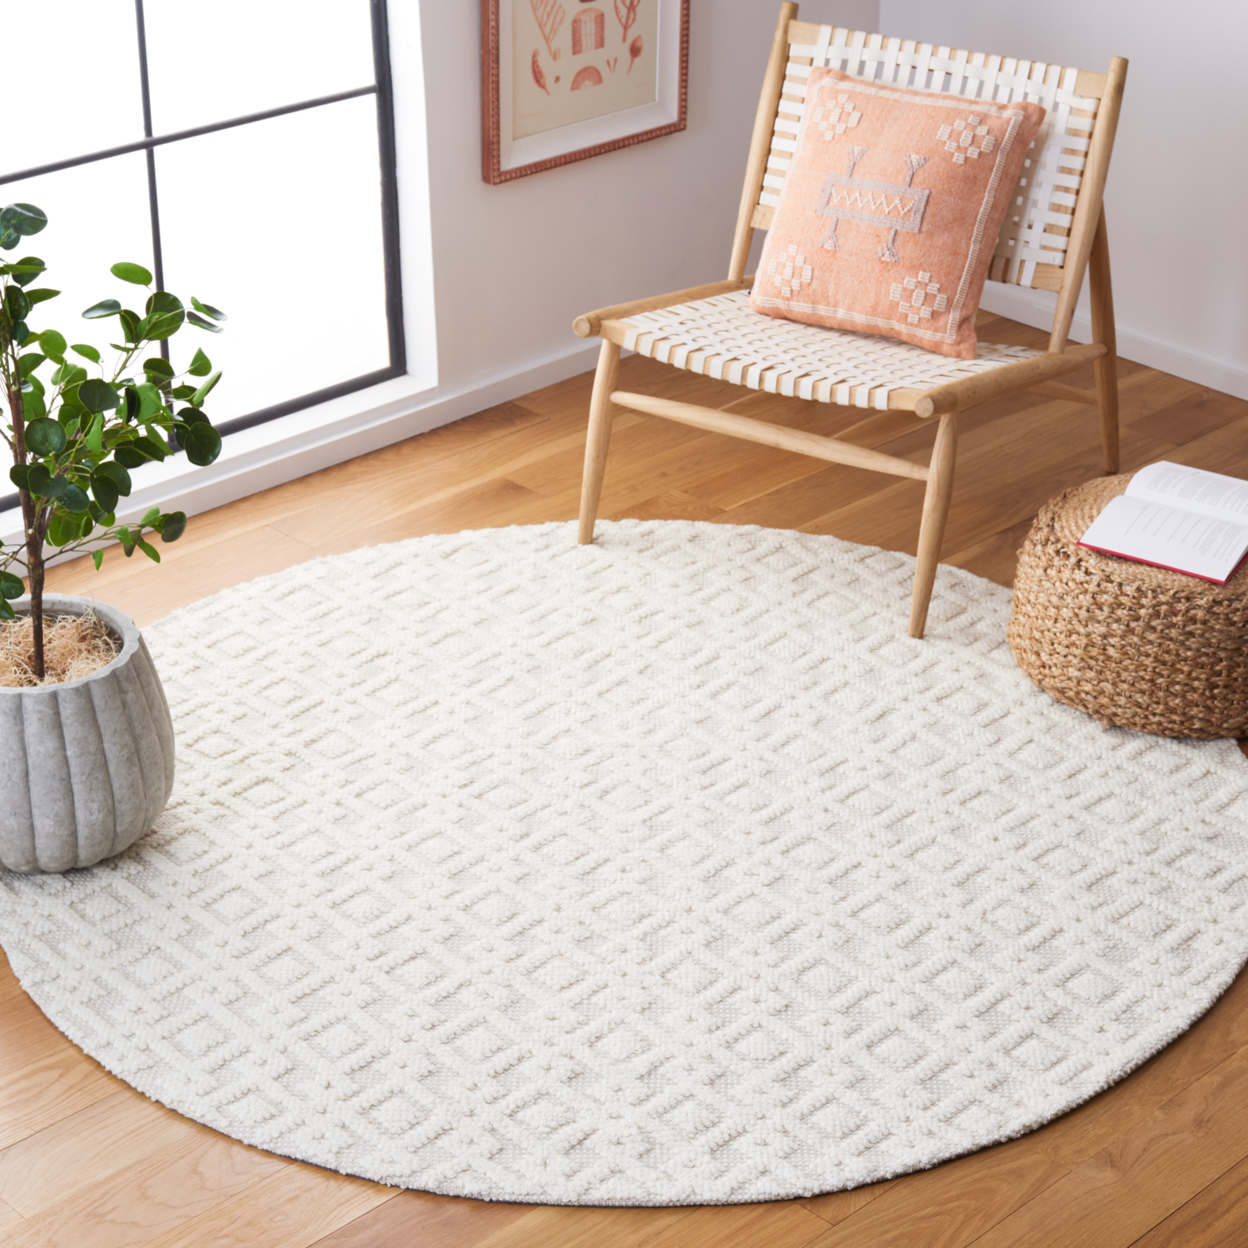 SAFAVIEH Vermont Collection VRM102A Handwoven Ivory Rug - 2' 3 X 14'